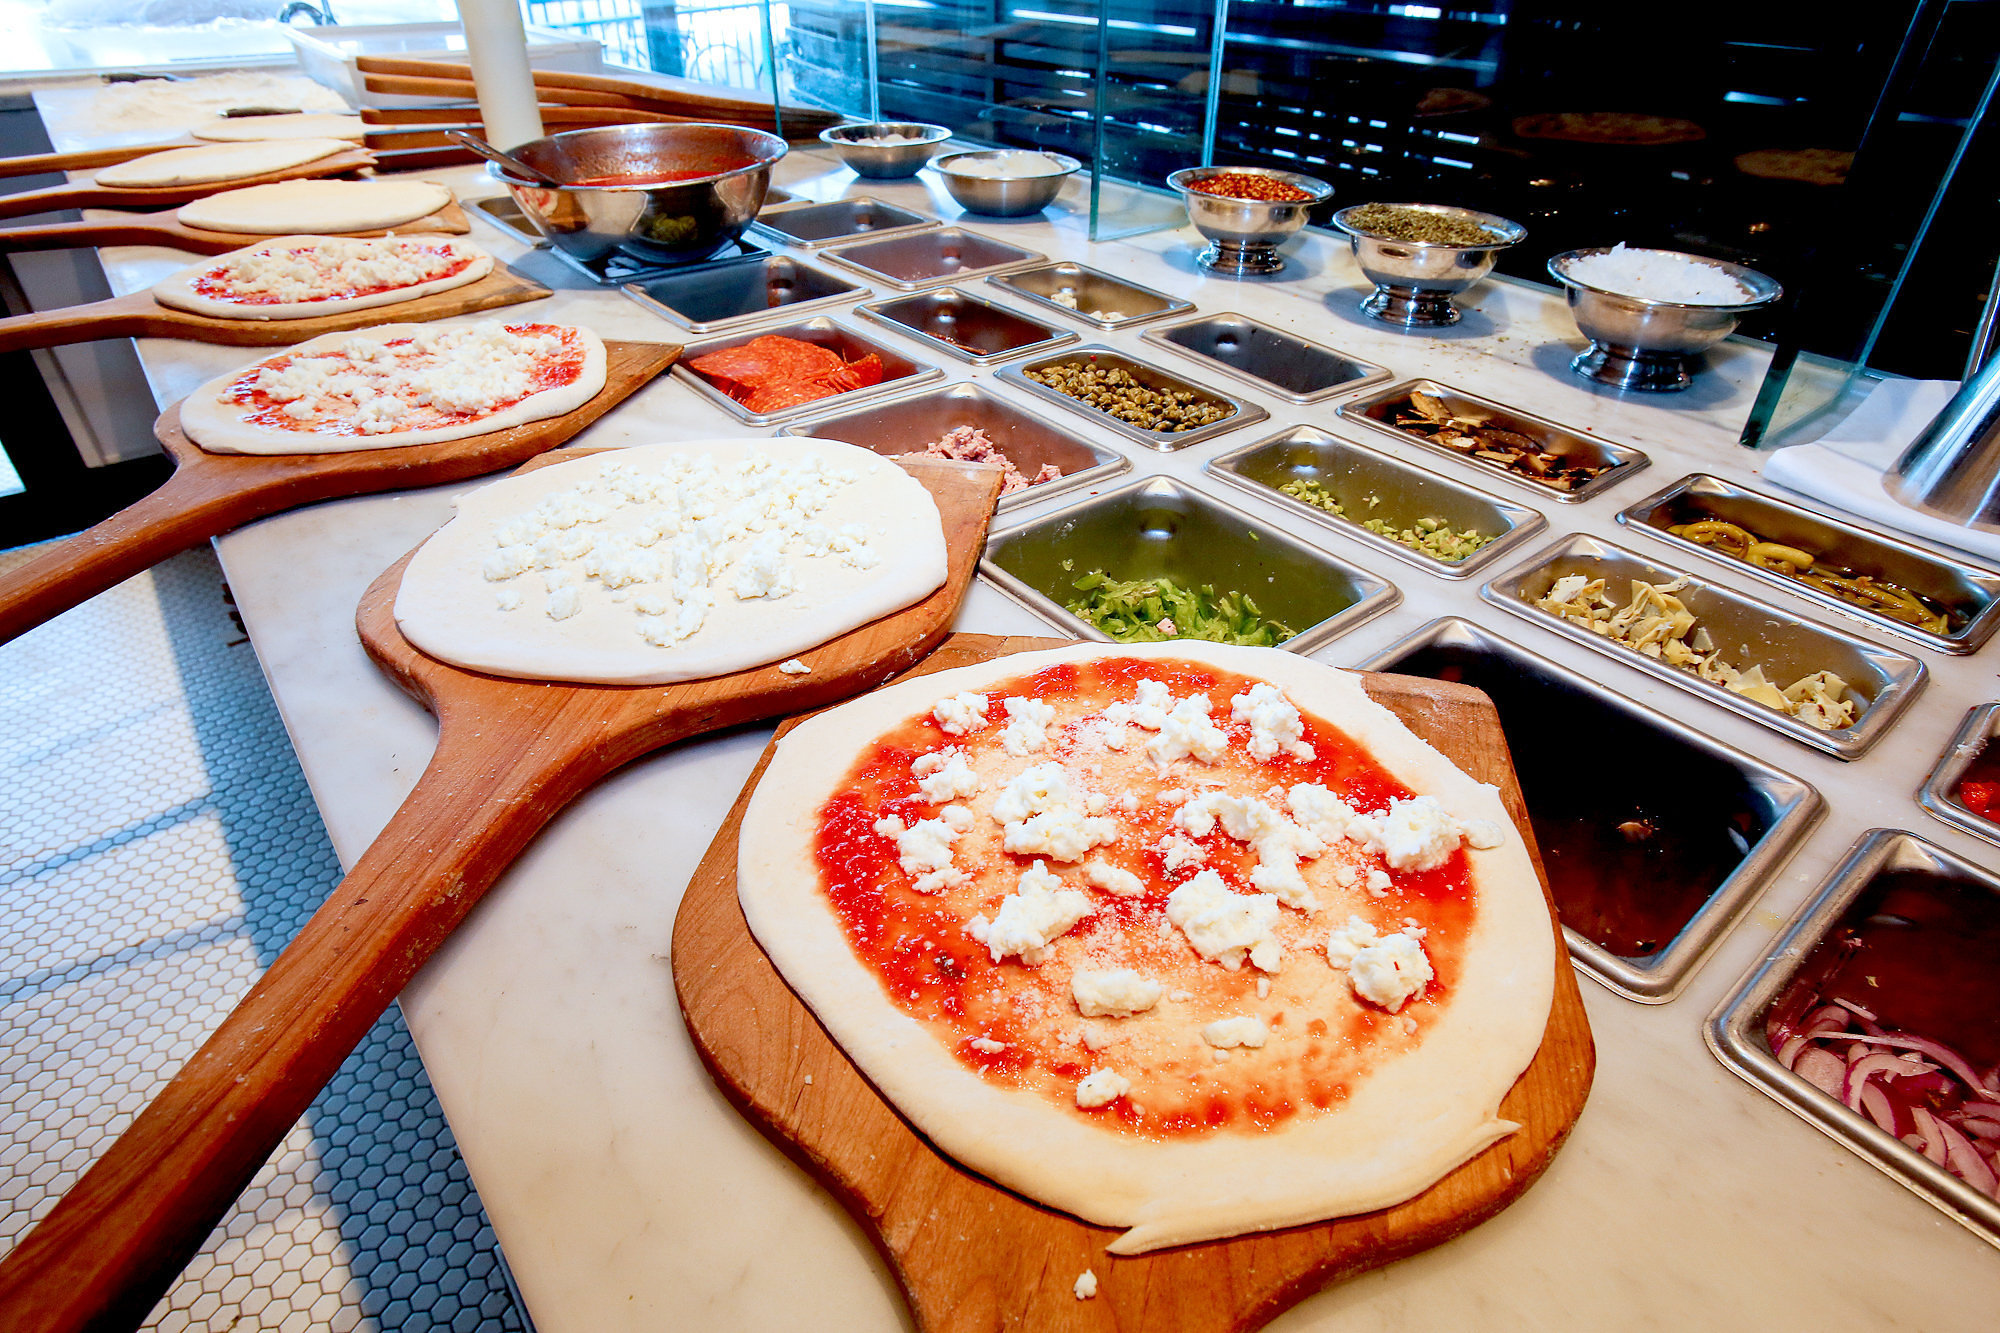 Pizzas lined up on a counter for topping